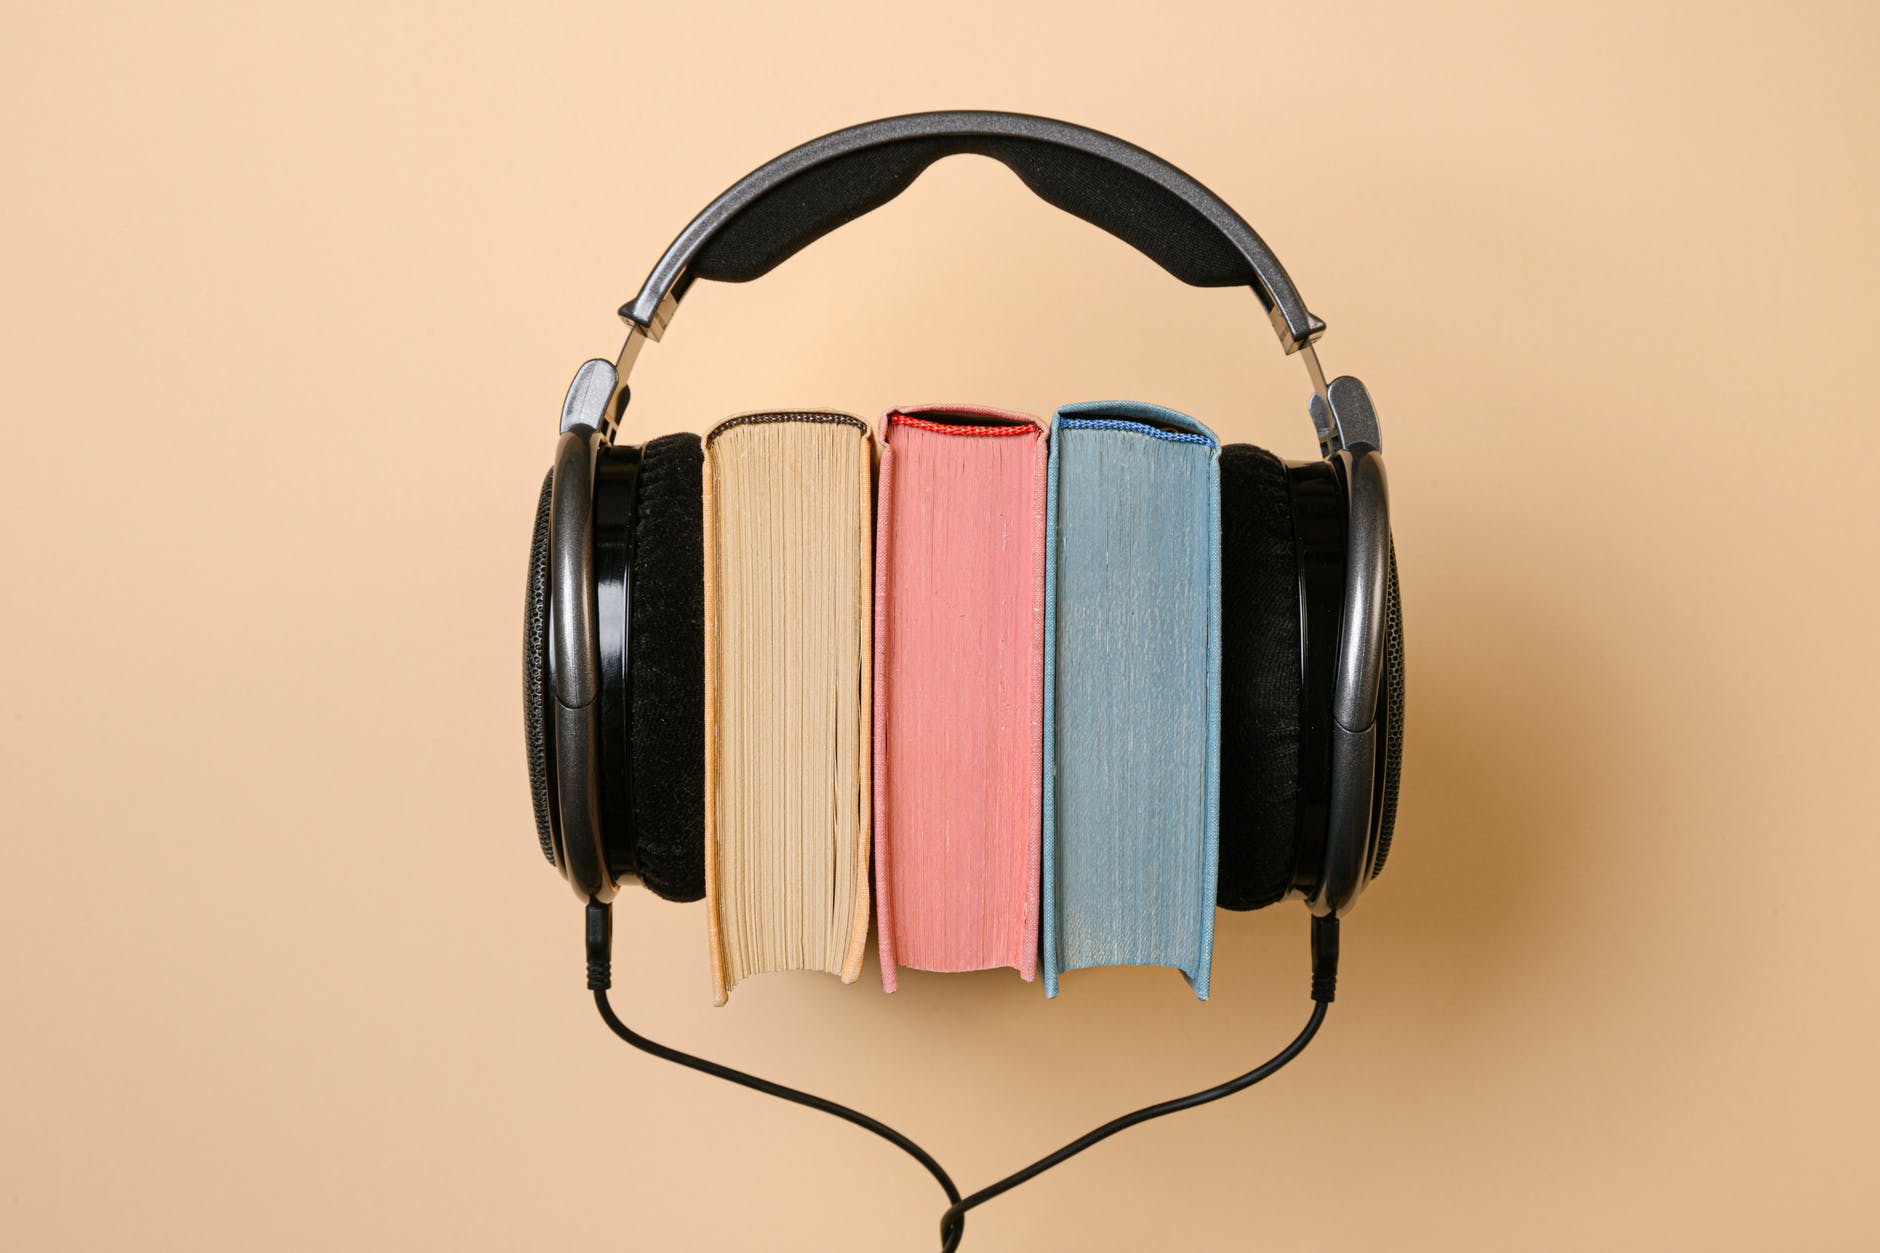 black corded headphones with colorful books in between